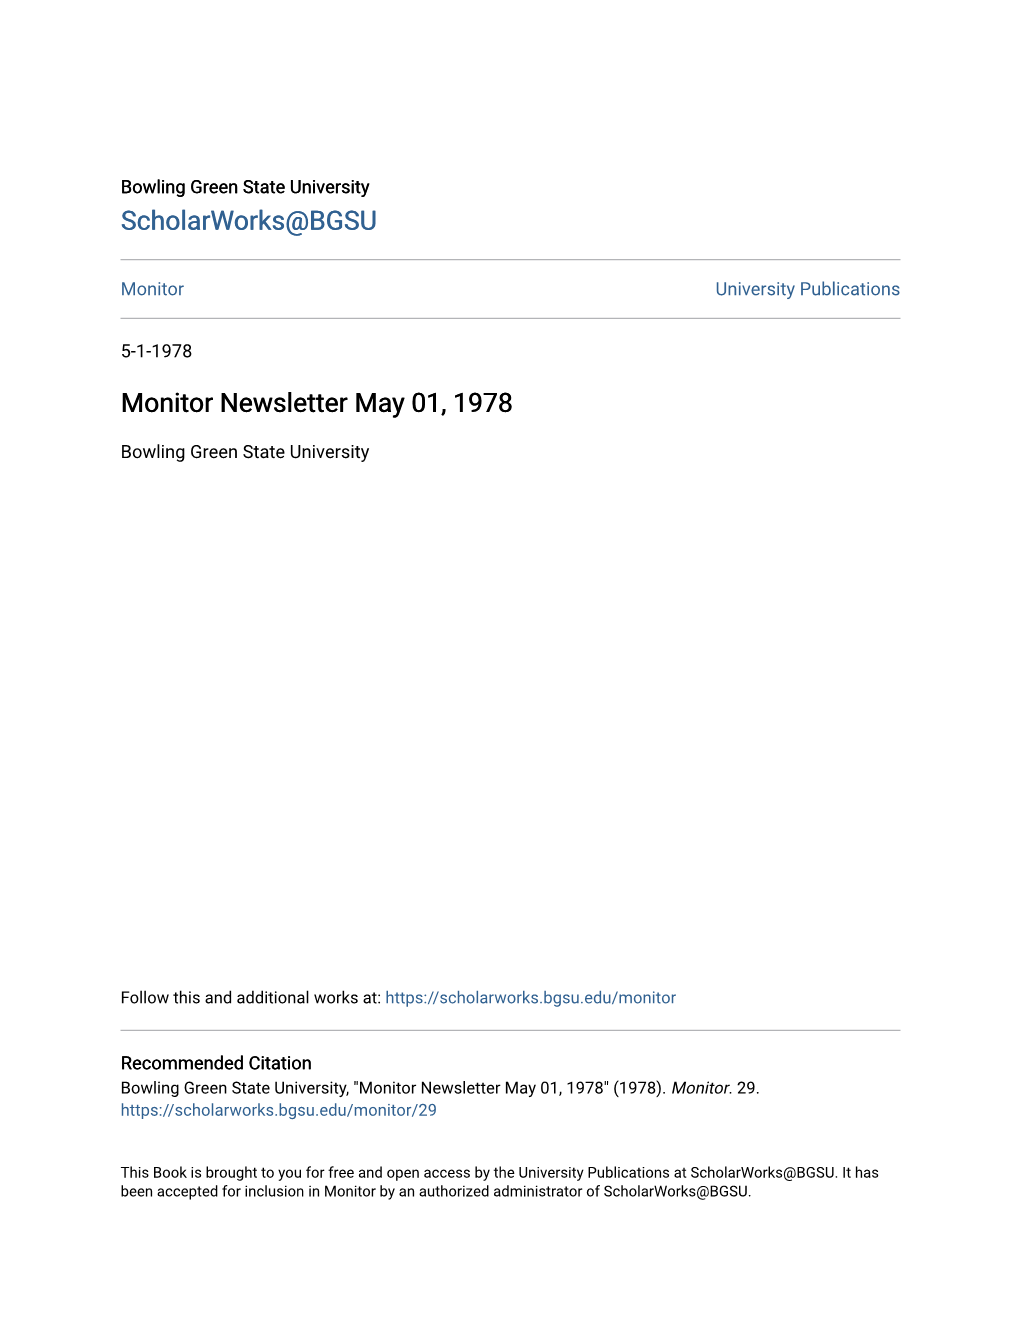 Monitor Newsletter May 01, 1978